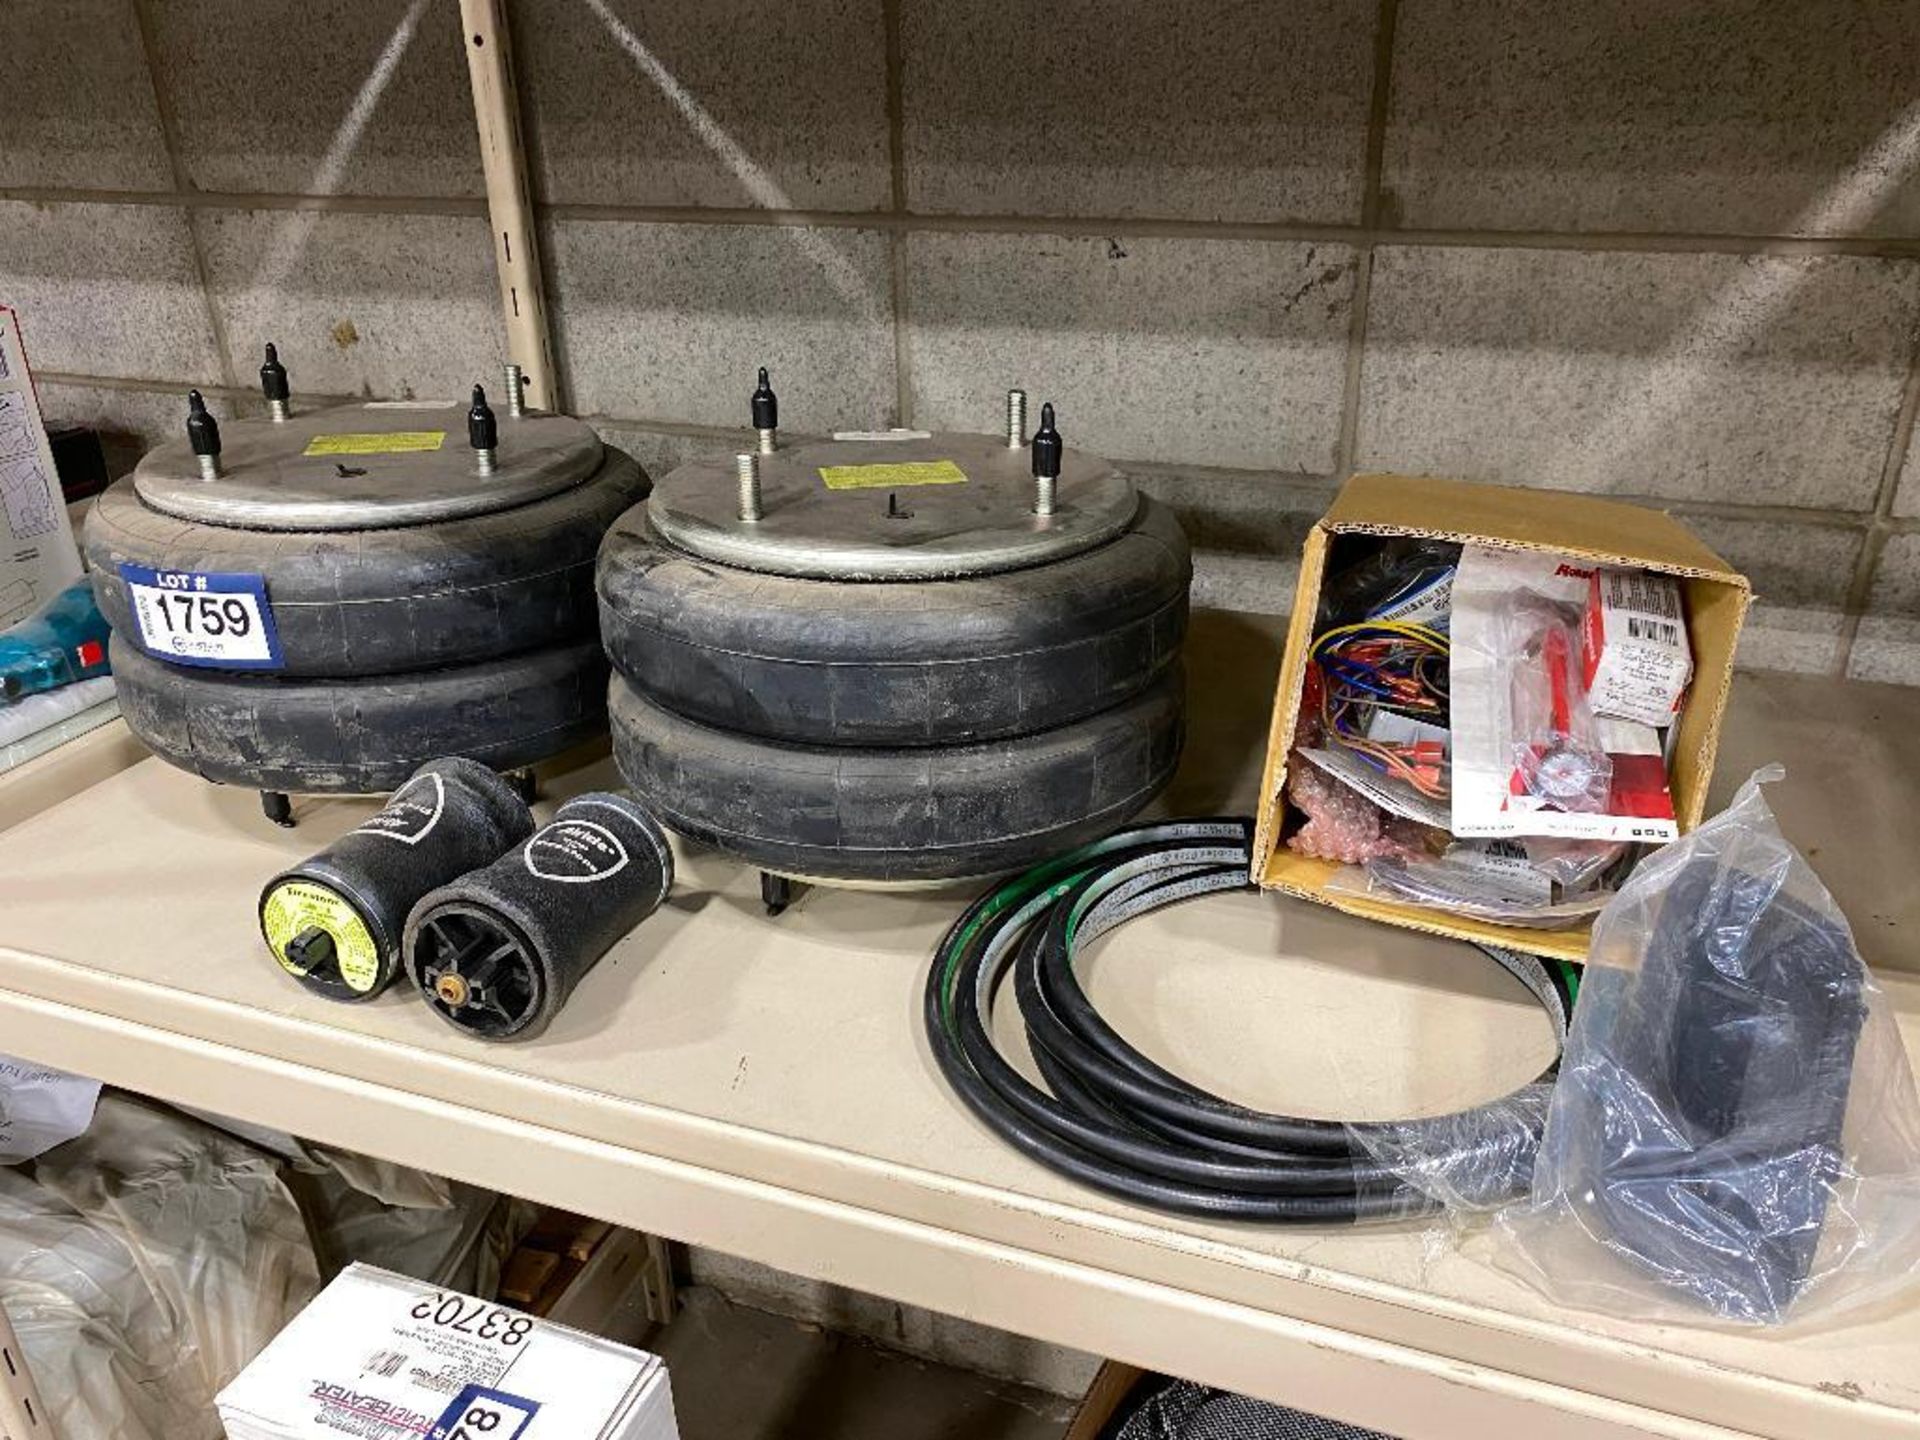 Lot of Asst. Automotive Parts including Light, Wiring, Air Rides, etc. - Image 2 of 4